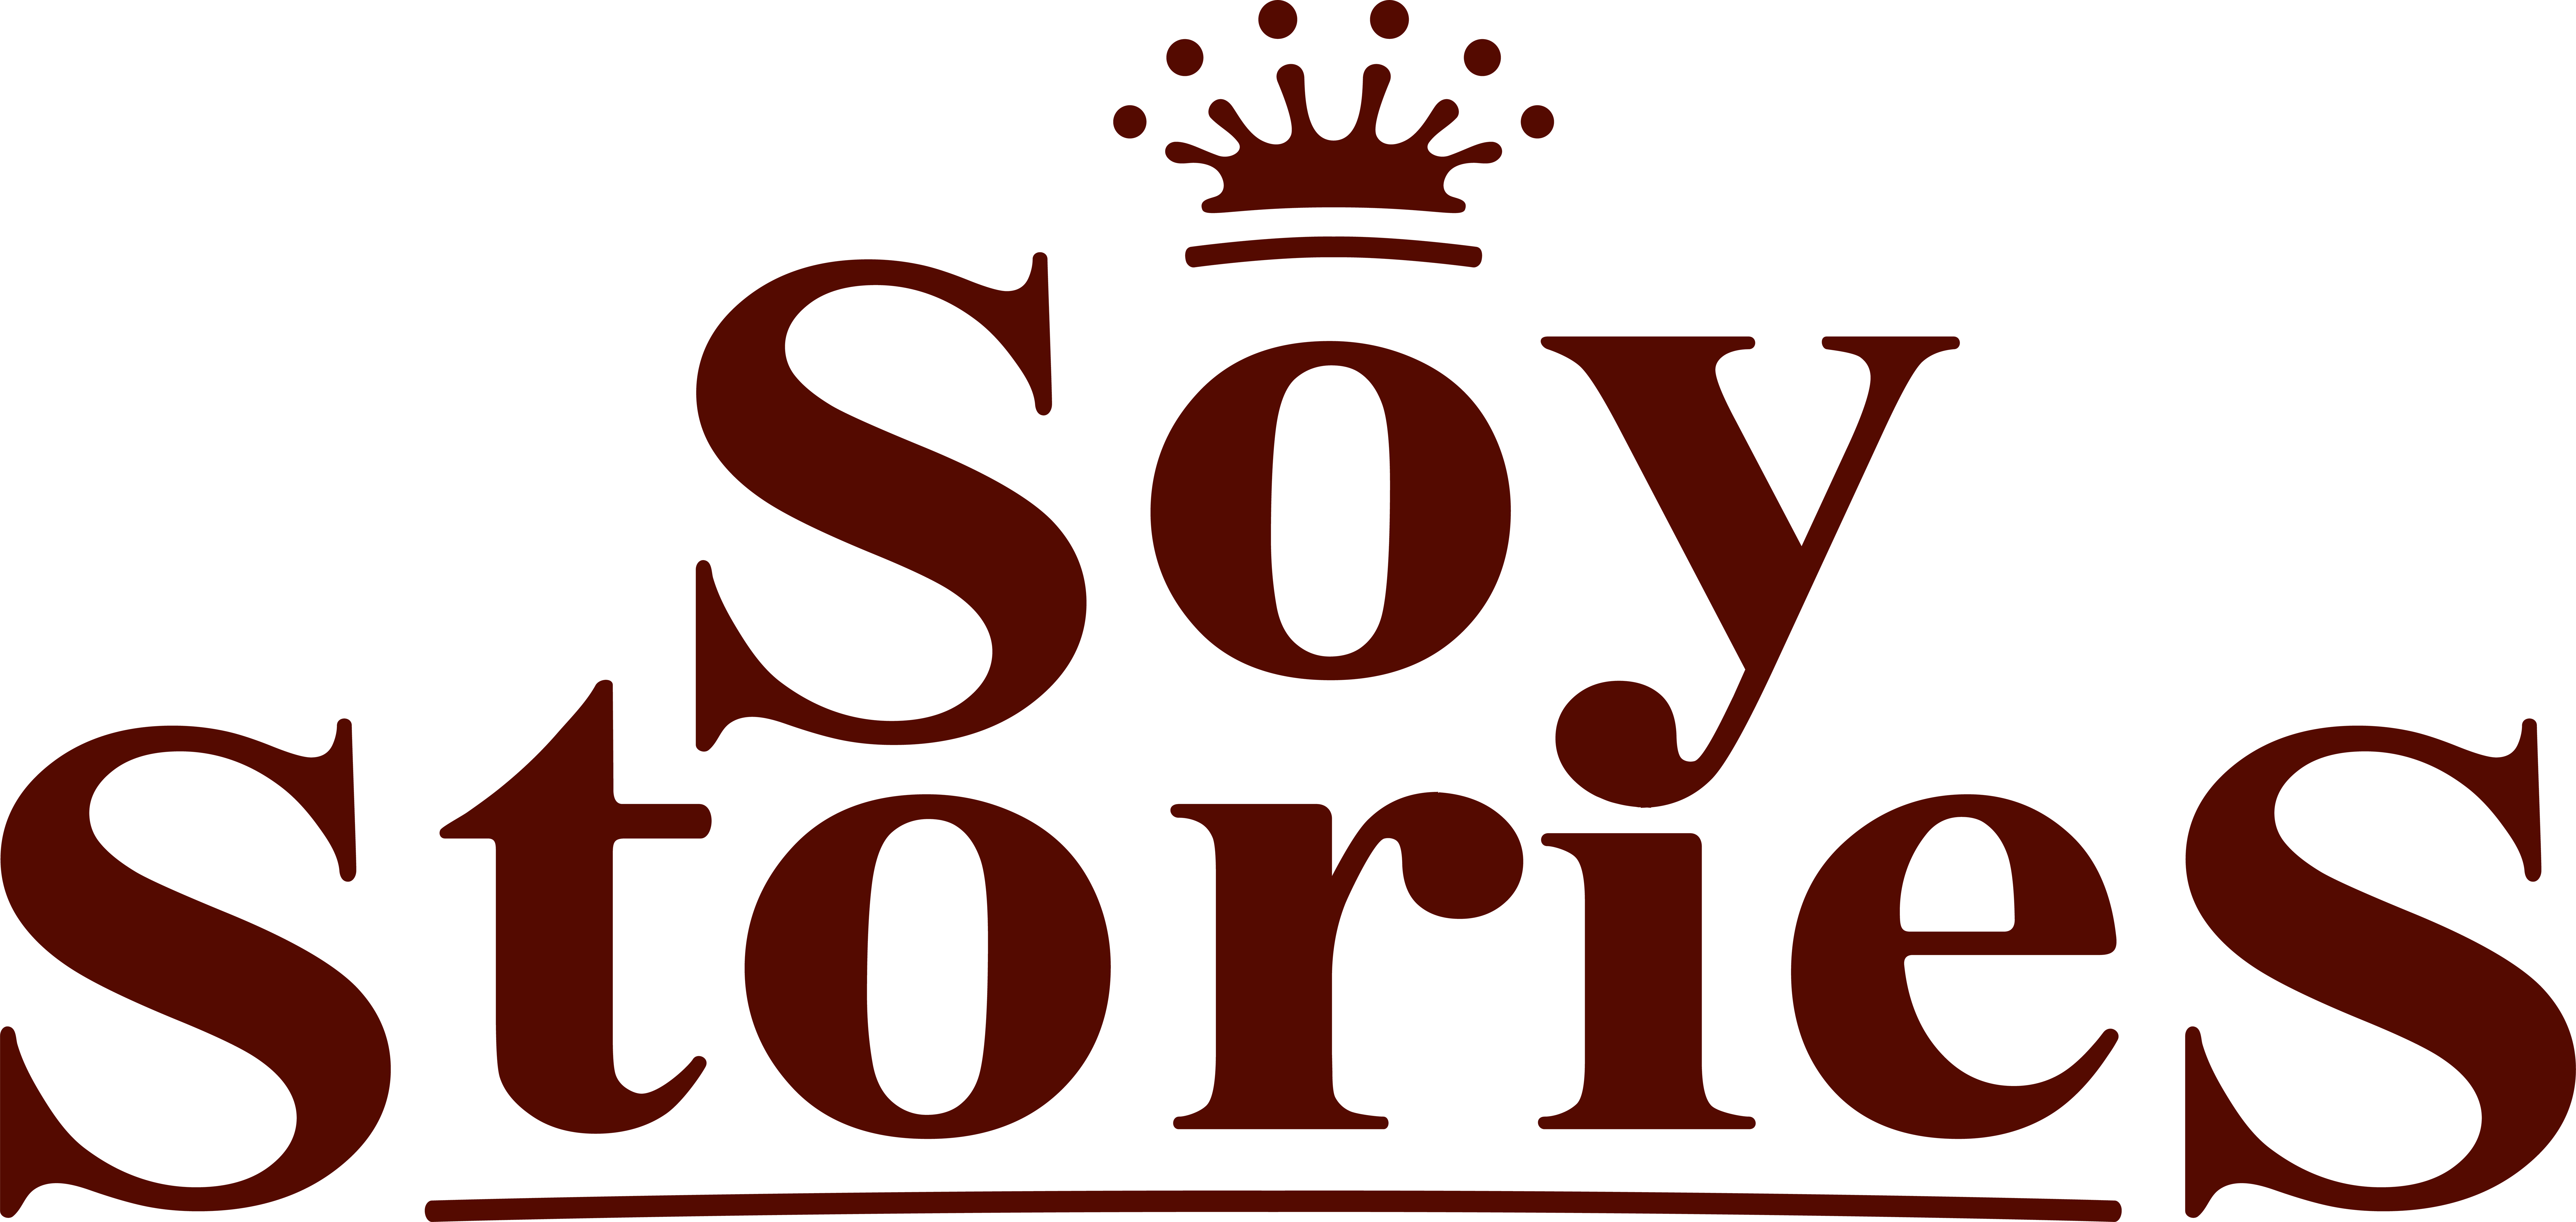 Soy Stories